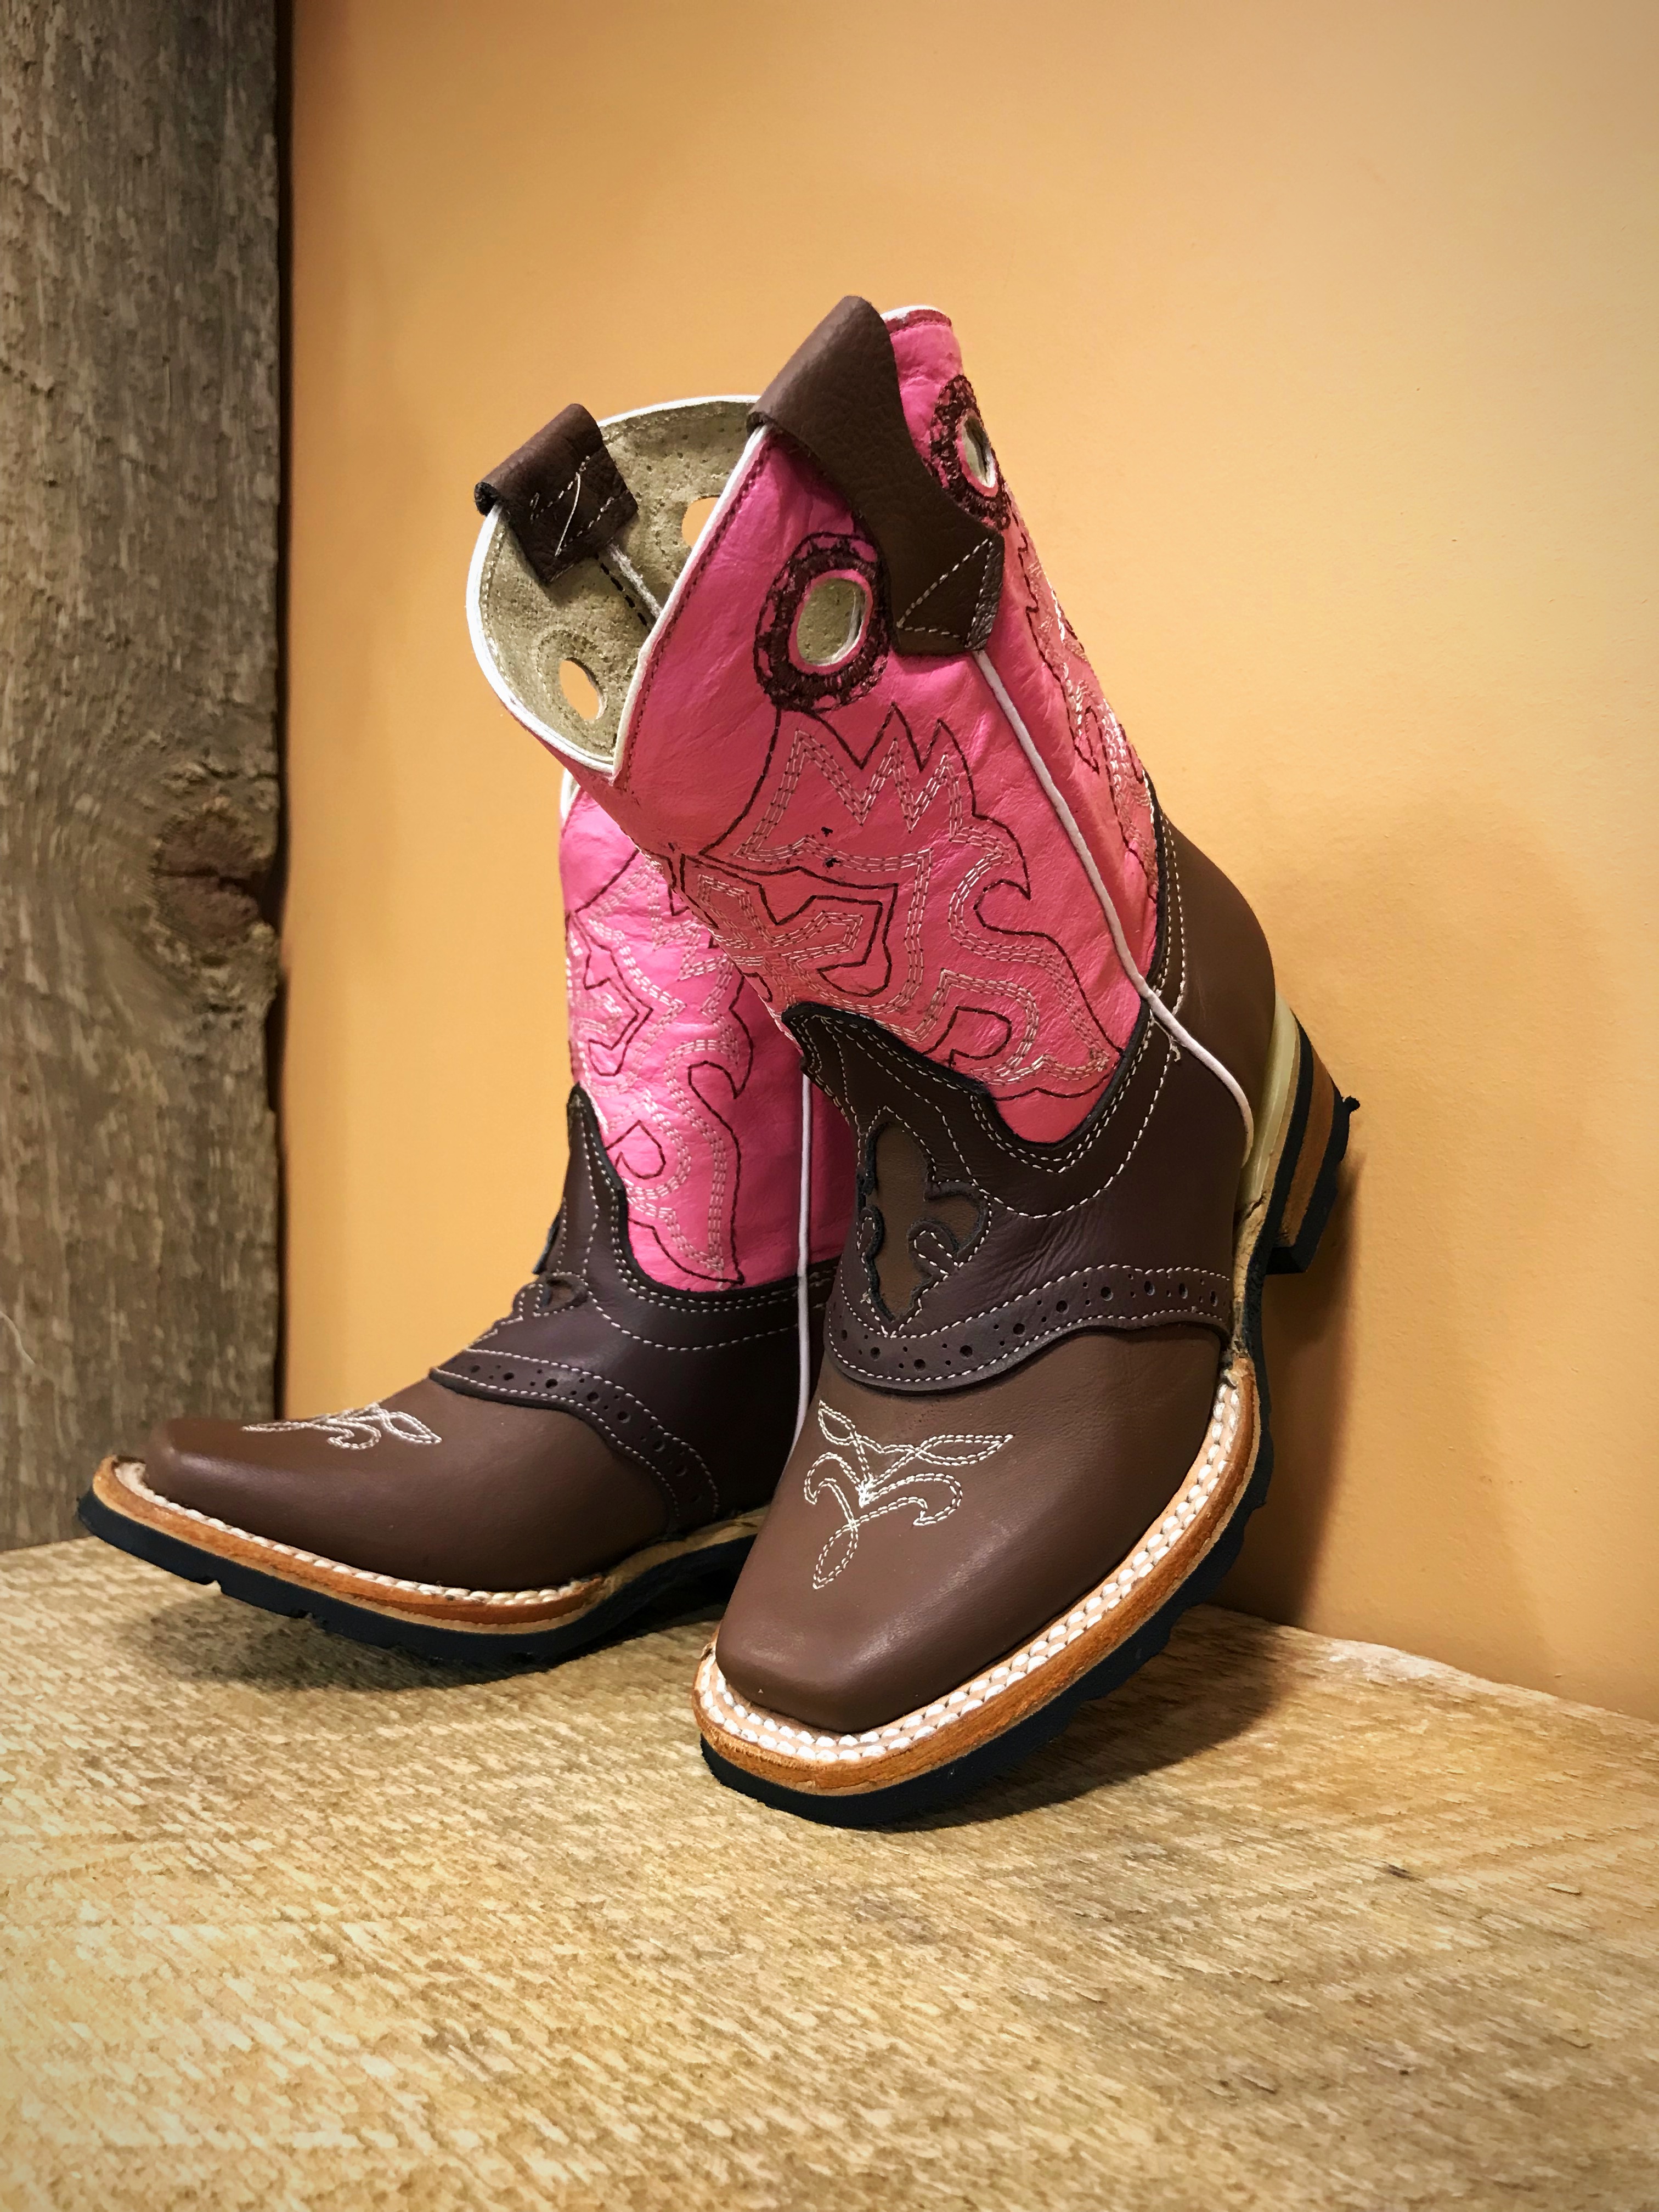 STONE BOOTS - Girl's Square Toe Cowgirl 